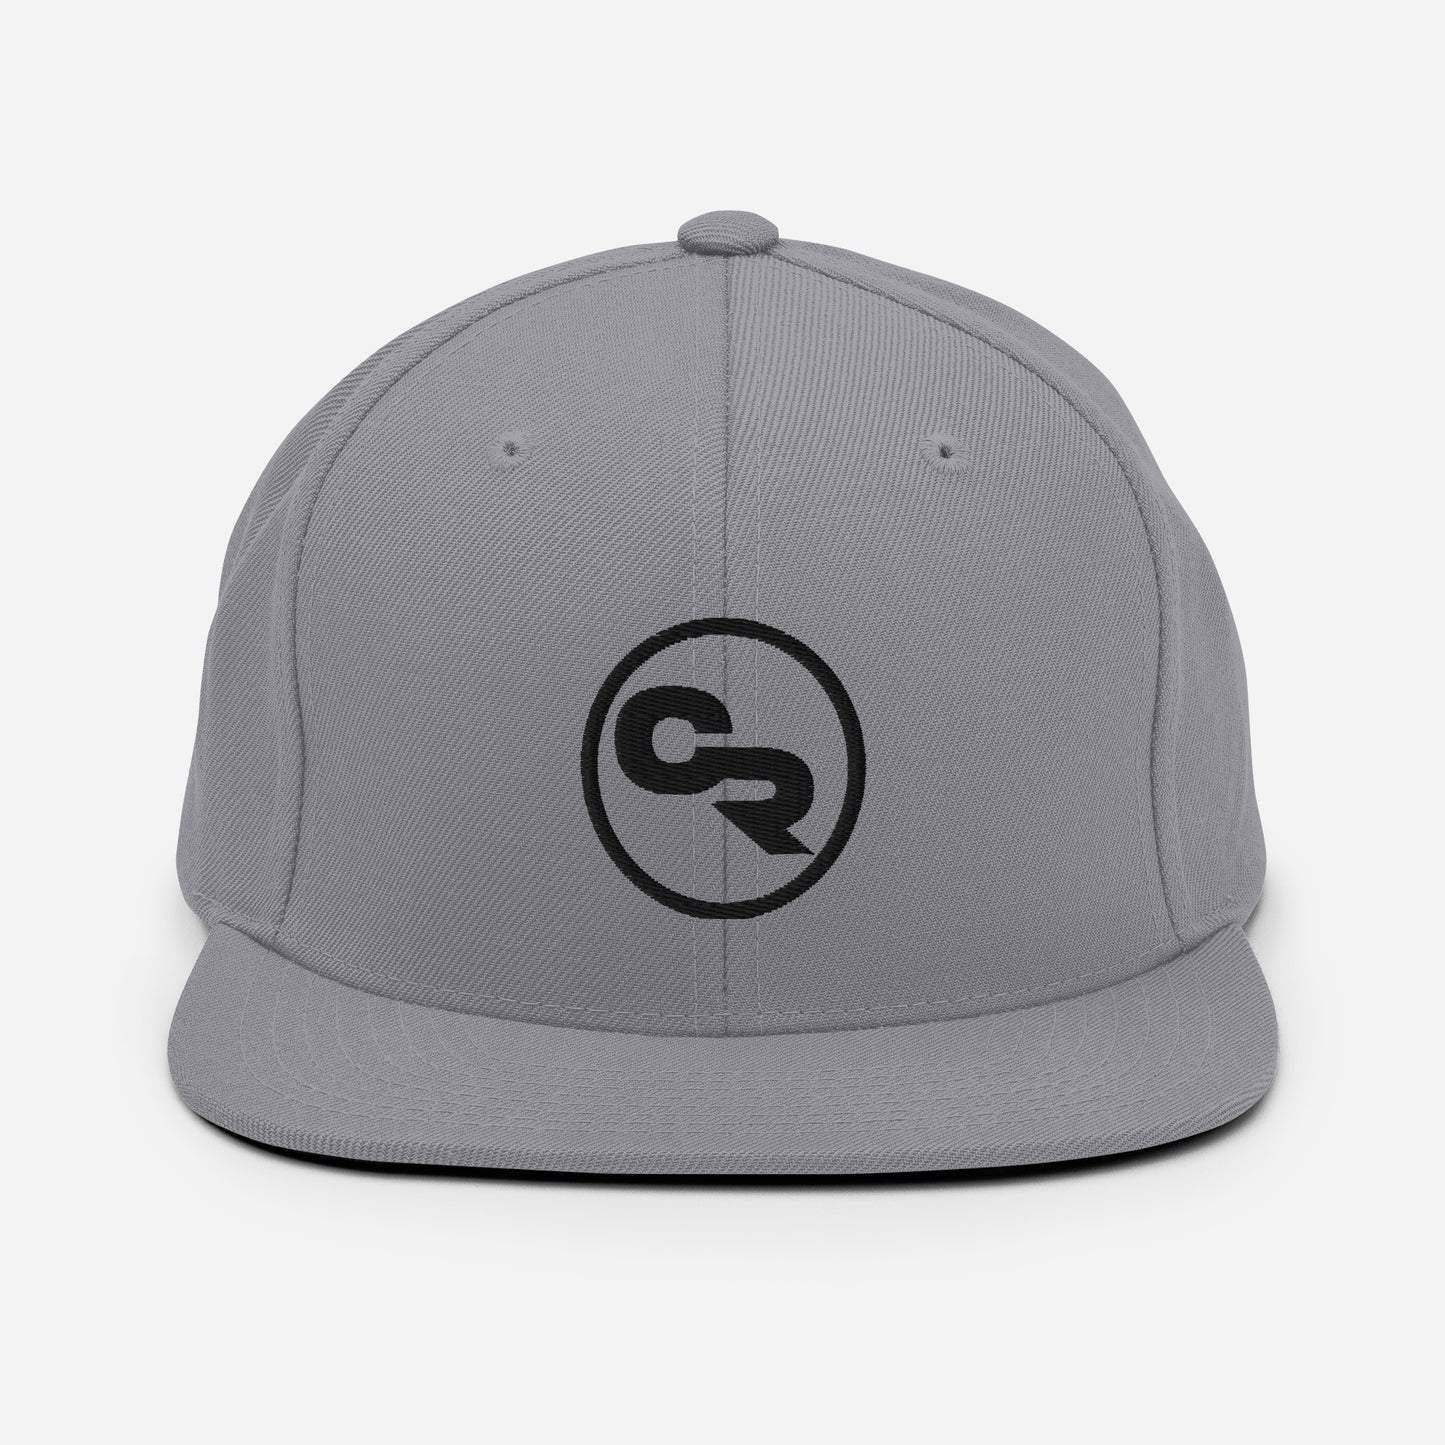 Chuck "The Voice" Roberts Silver Gray Embroidered Snapback Hat